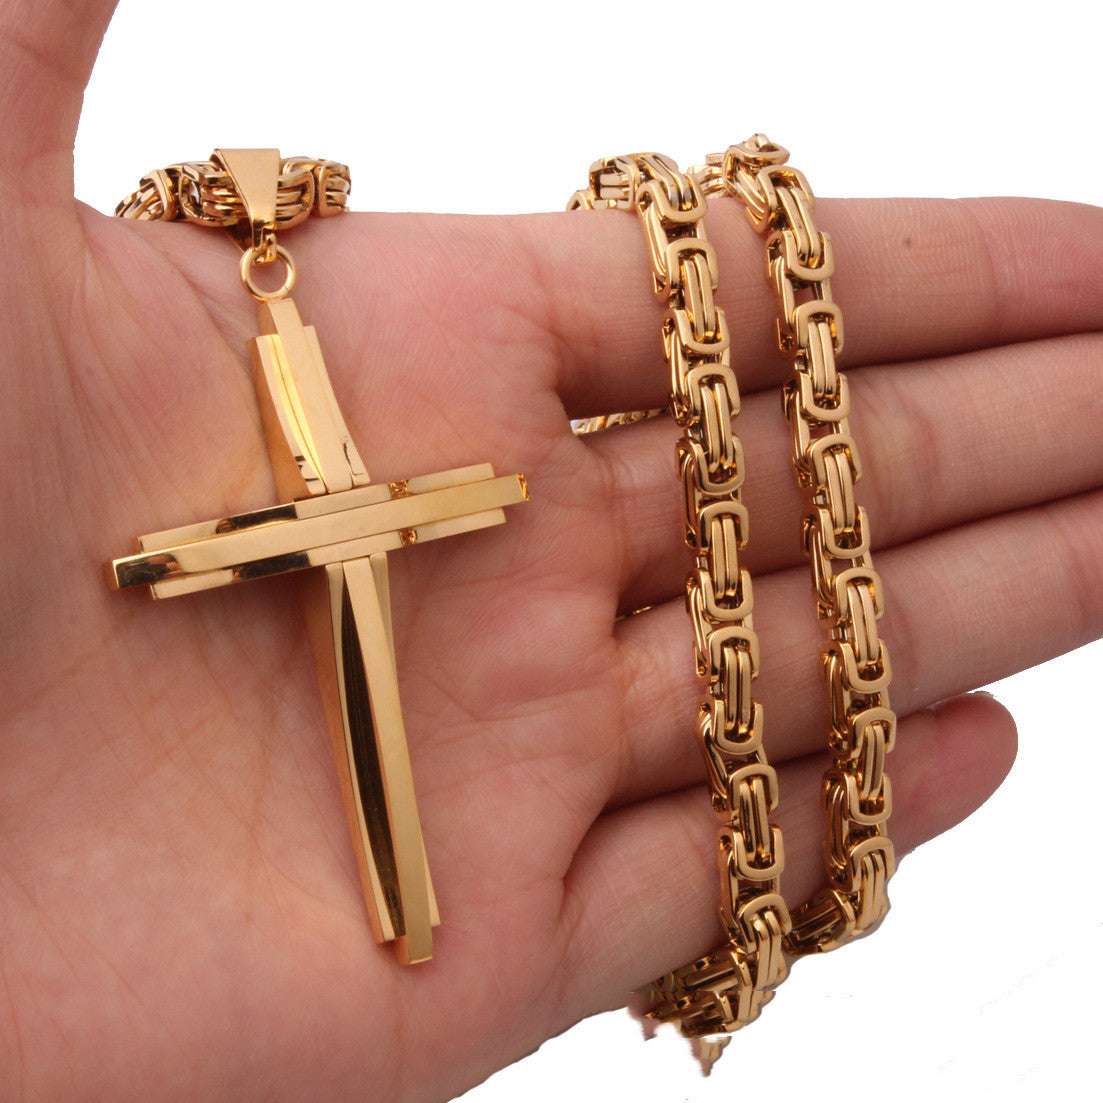 5mm Chain Necklace, Handmade Cross Pendant, Stylish Pendant Necklace - available at Sparq Mart